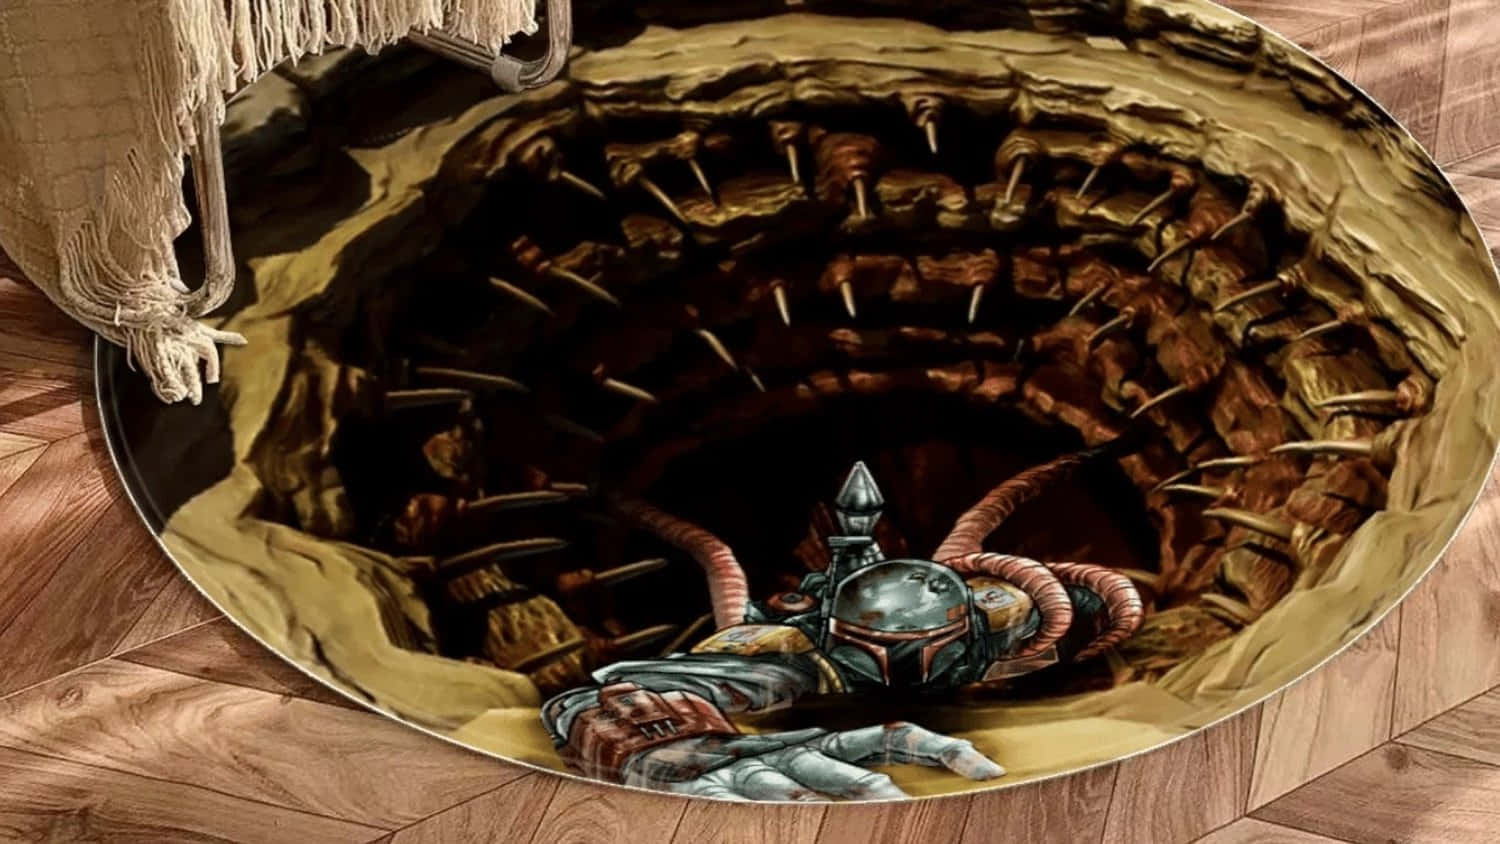 The Sarlacc Pit, Home of the Savage Beast" Wallpaper